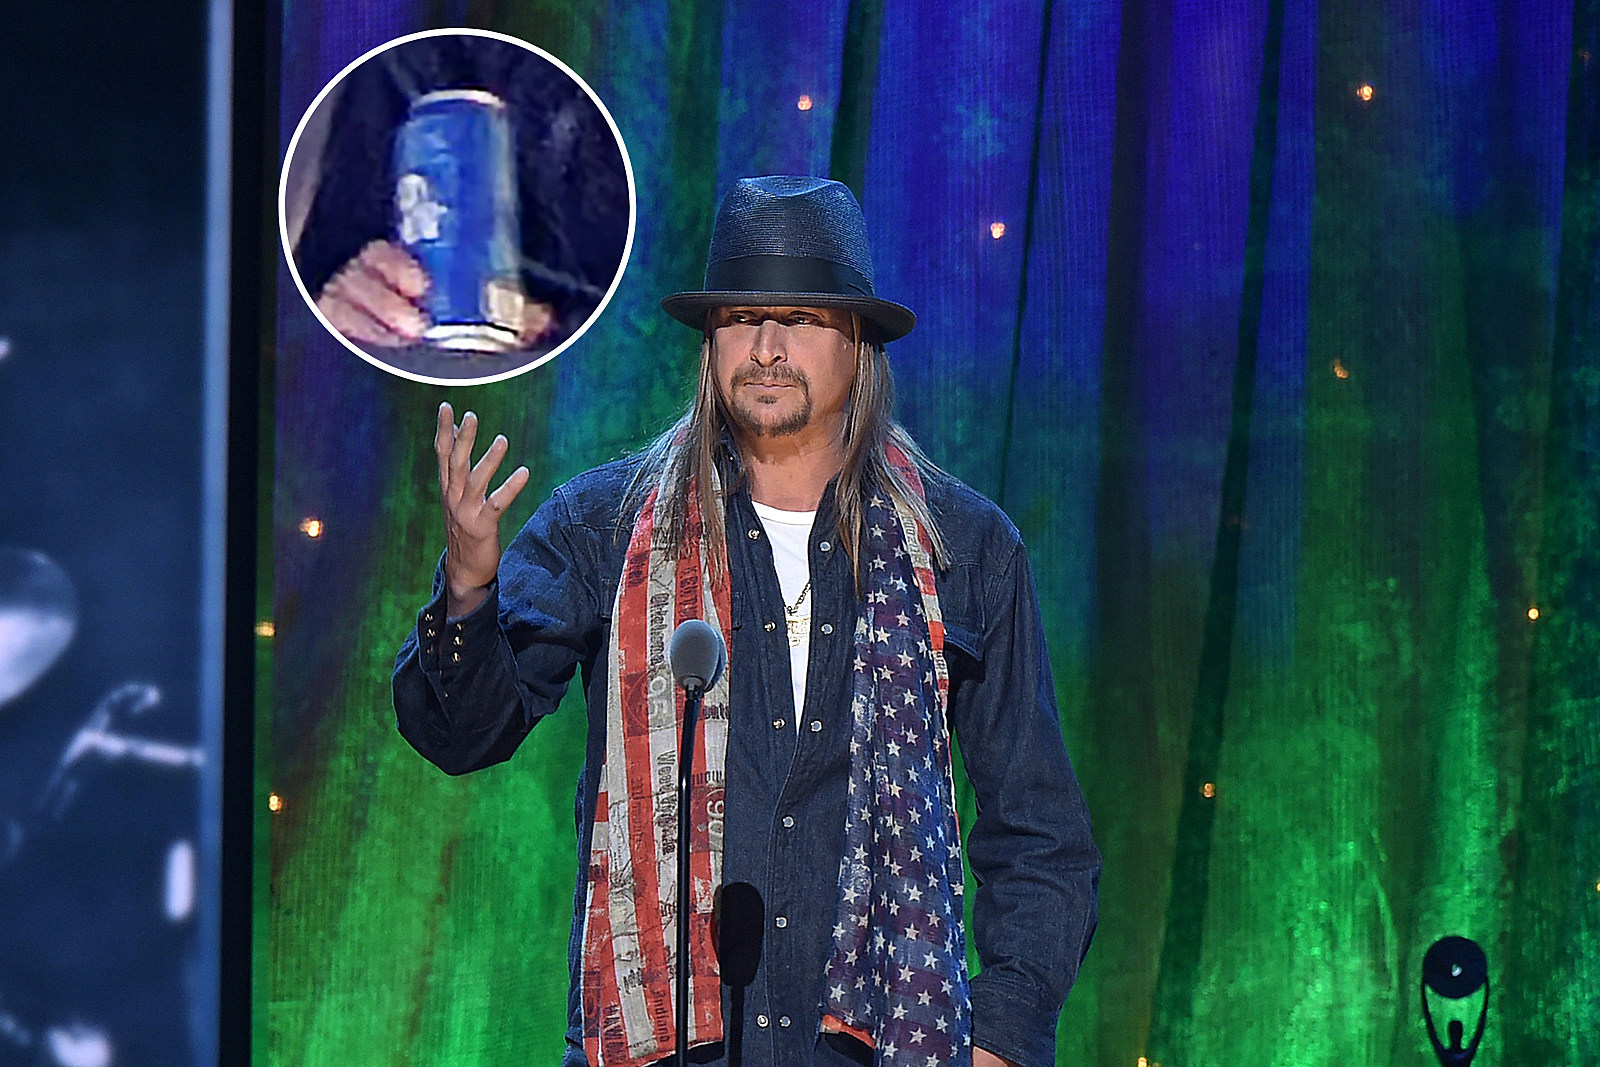 Kid Rock Visits White House to Rekindle His Relationship With Authority